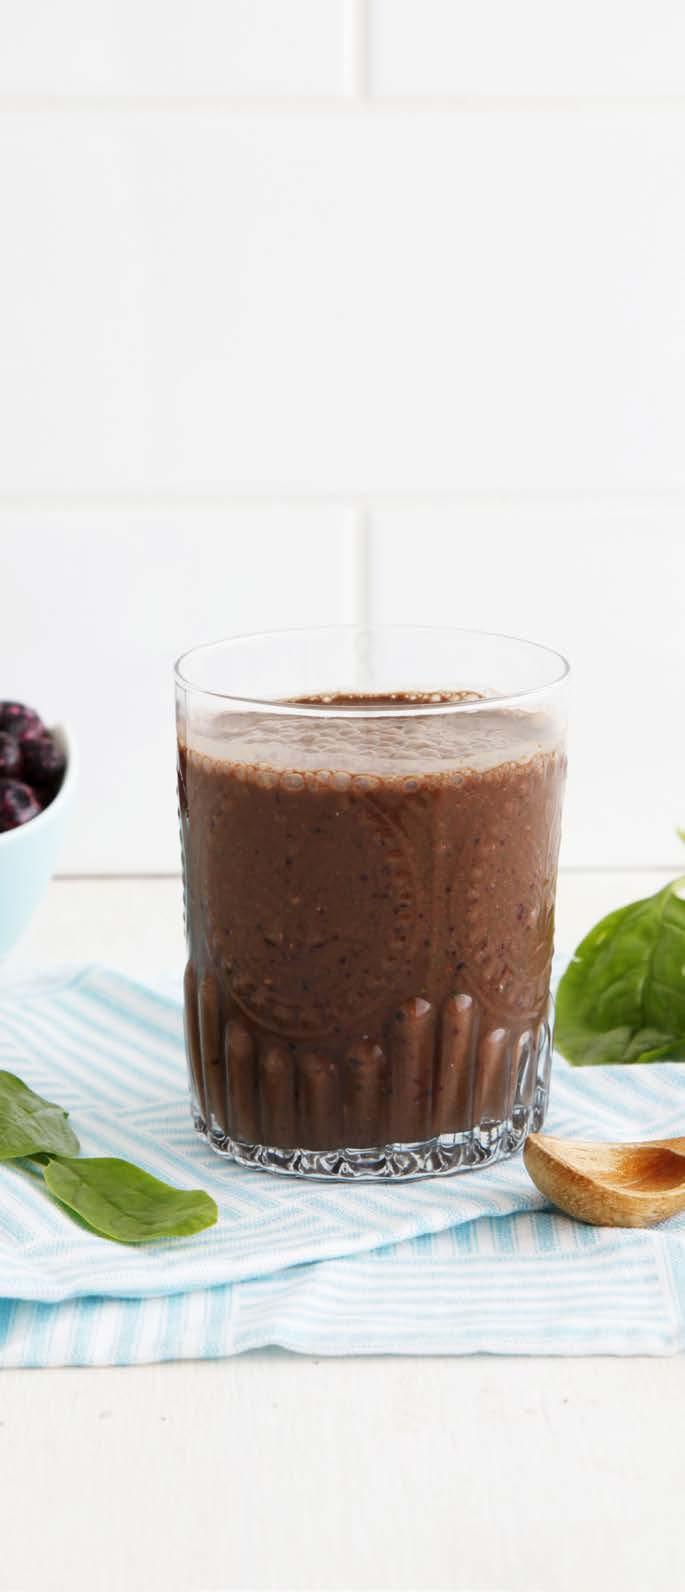 CHOCOLATE SMOOTHIES Chocolate Power SERVES 1 CALORIES PER SERVE: 320 (1344KJ) NUTRITIONAL INFO: PROTEIN: 21G FIBRE: 10G TOTAL FAT: 11G SATURATED FAT: 1G CARBOHYDRATES: 33.